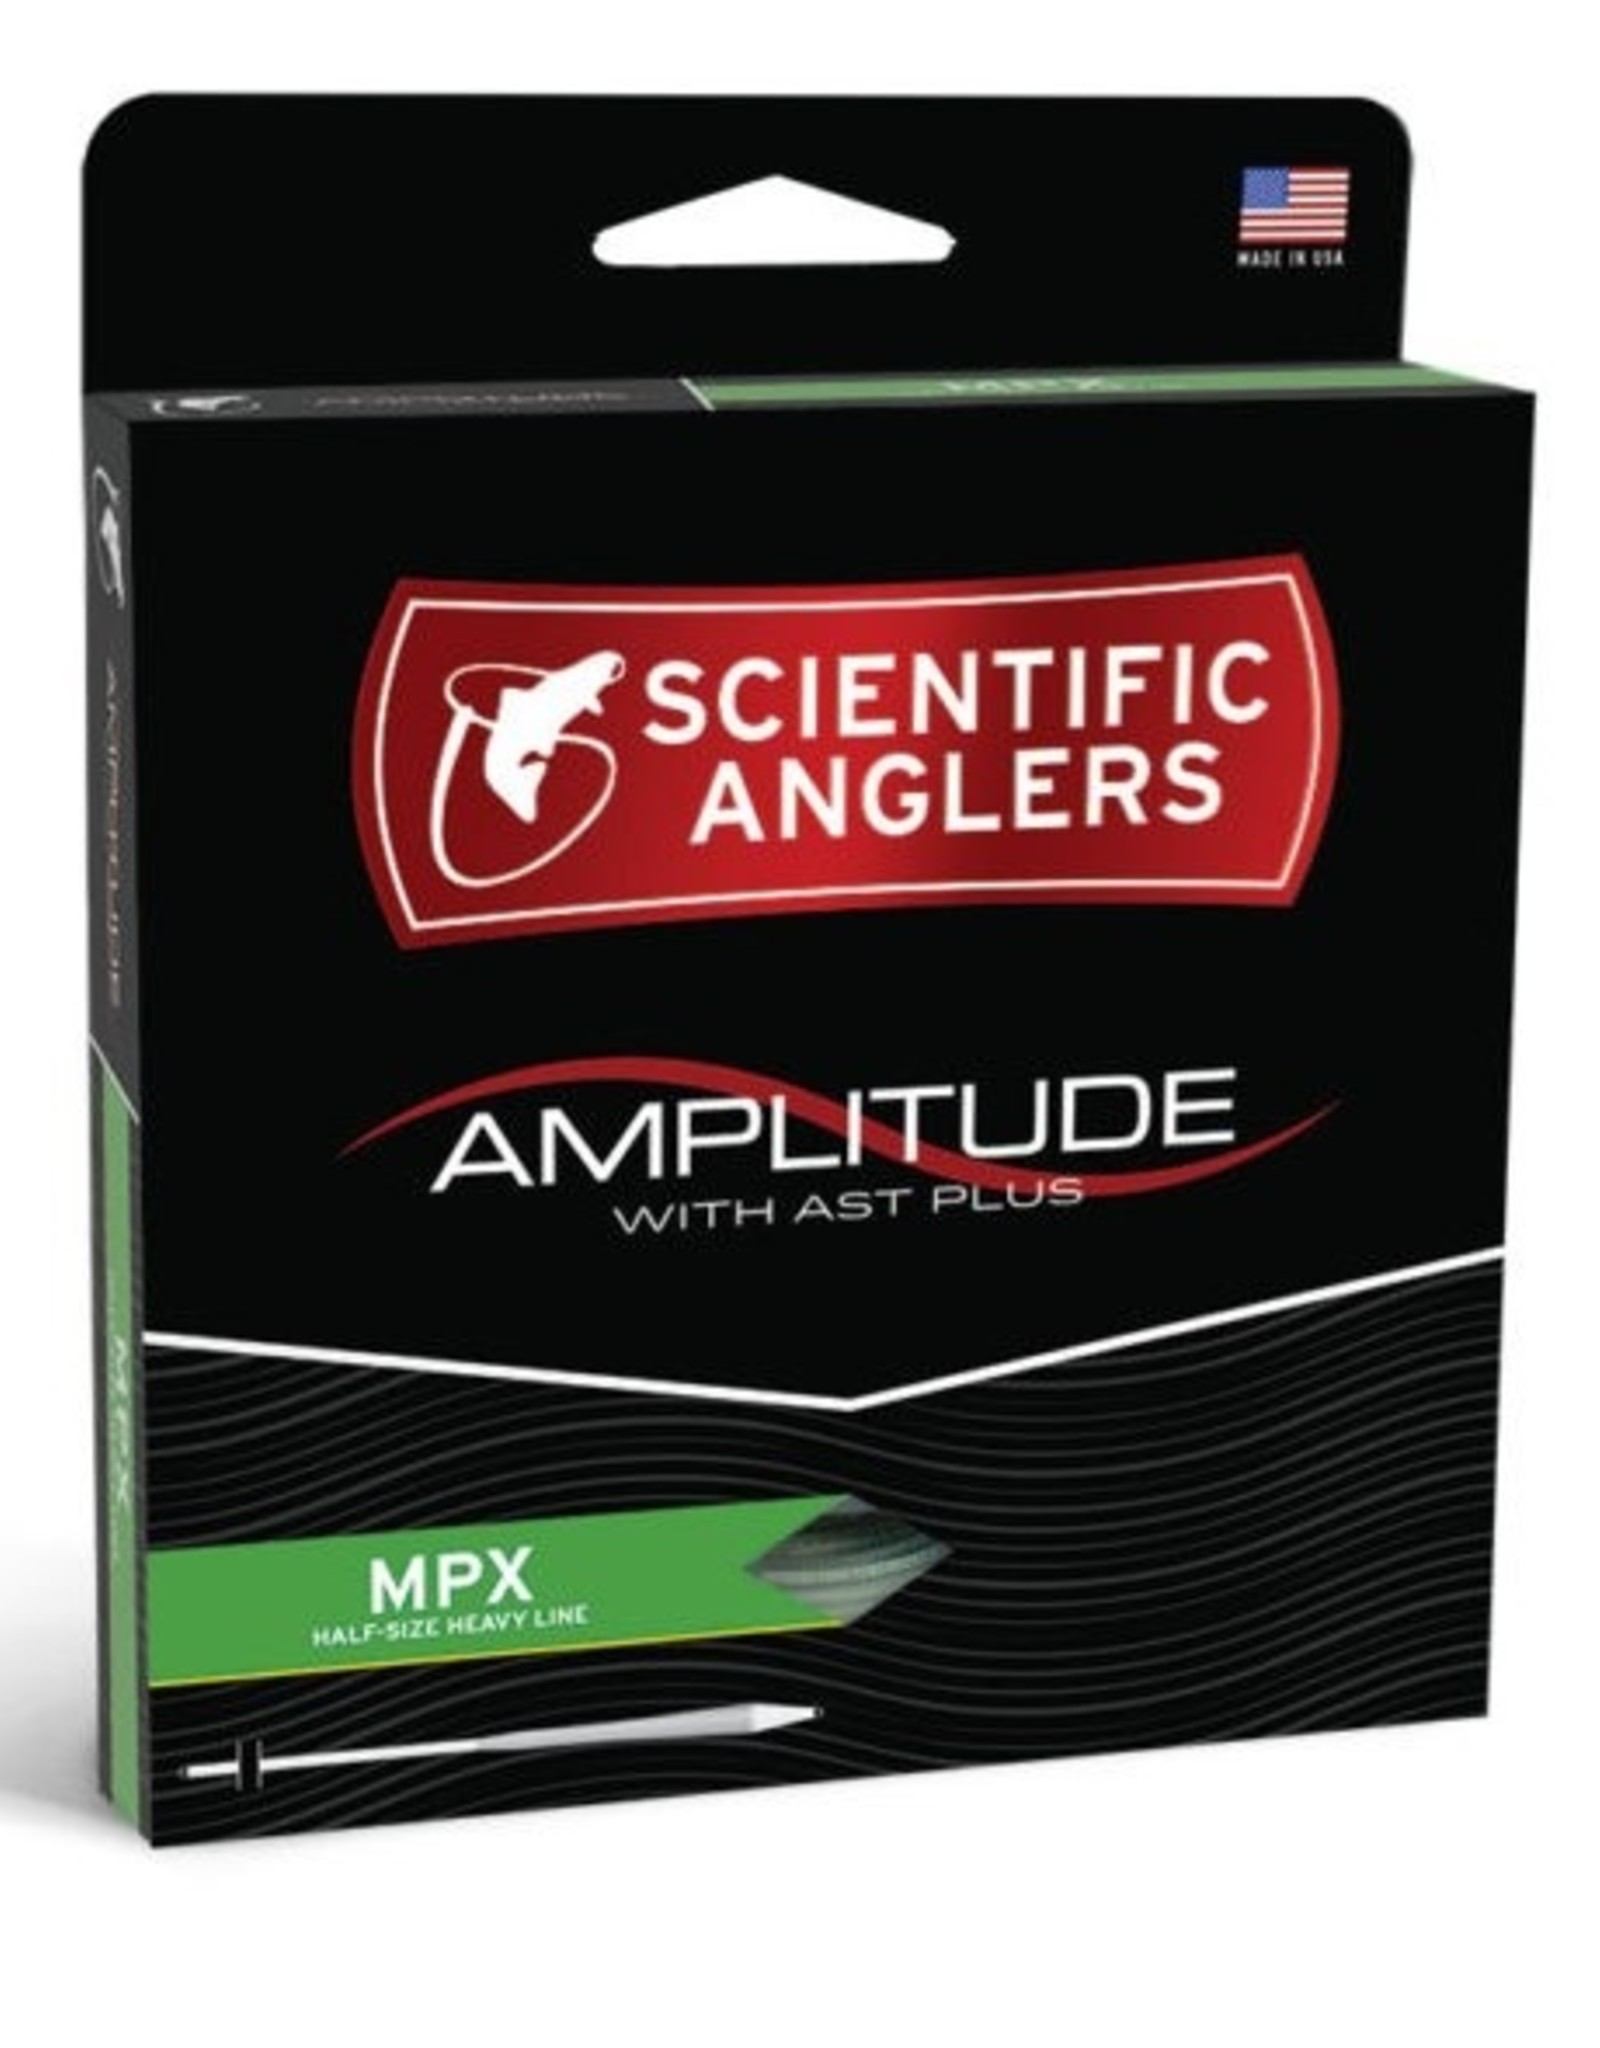 SCIENTIFIC ANGLERS AMPLITUDE TEXTURED MPX FLY LINE